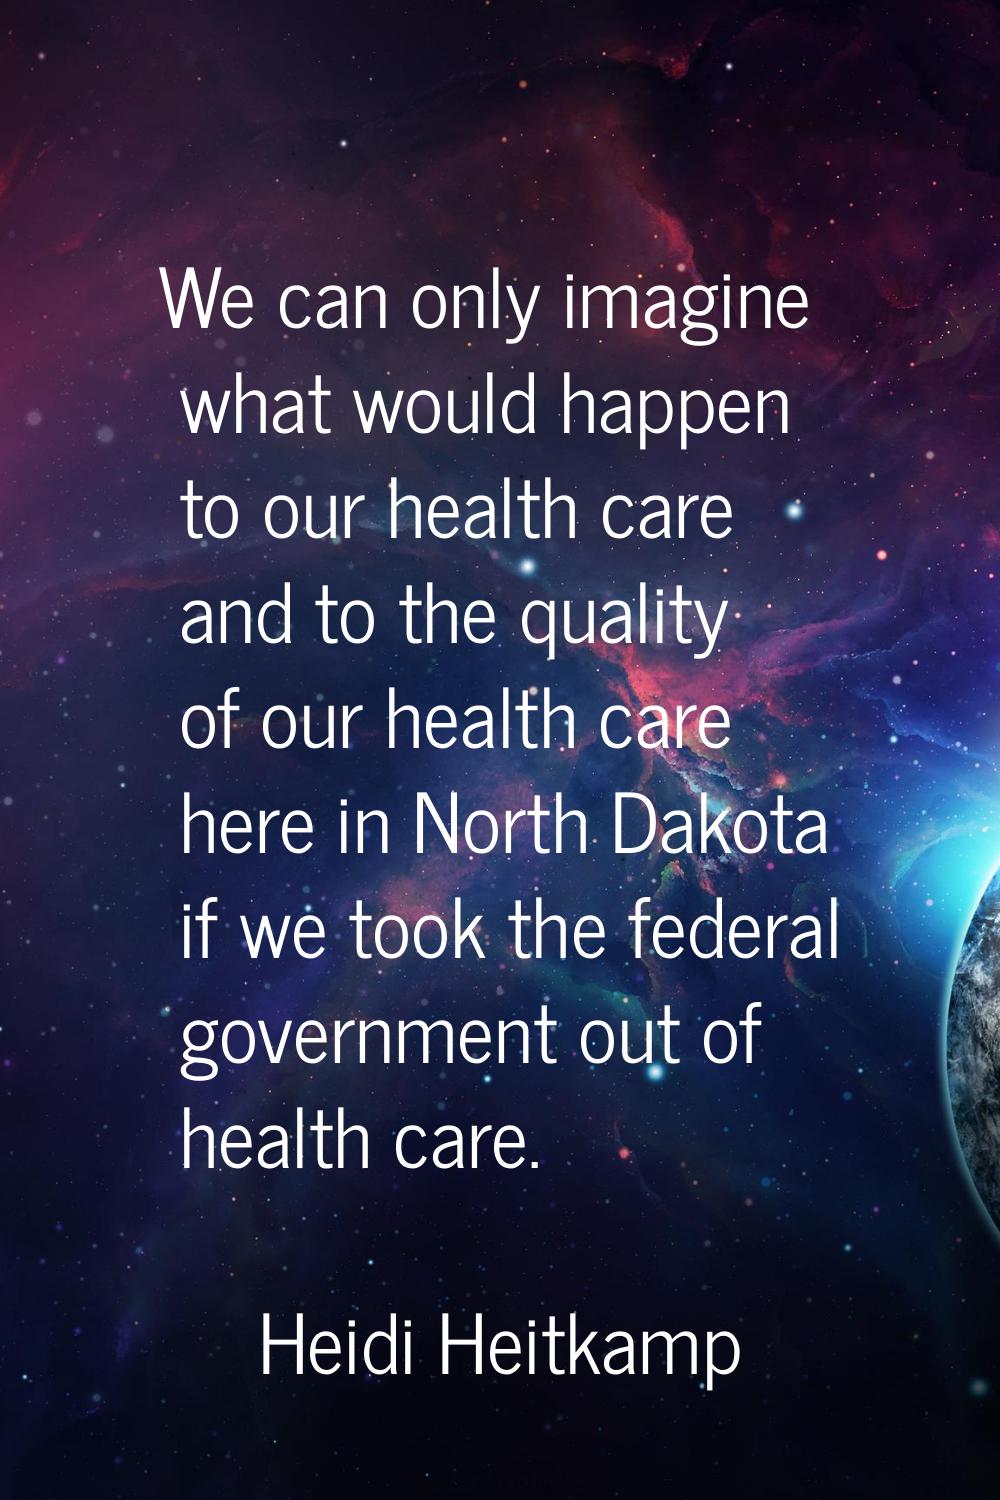 We can only imagine what would happen to our health care and to the quality of our health care here